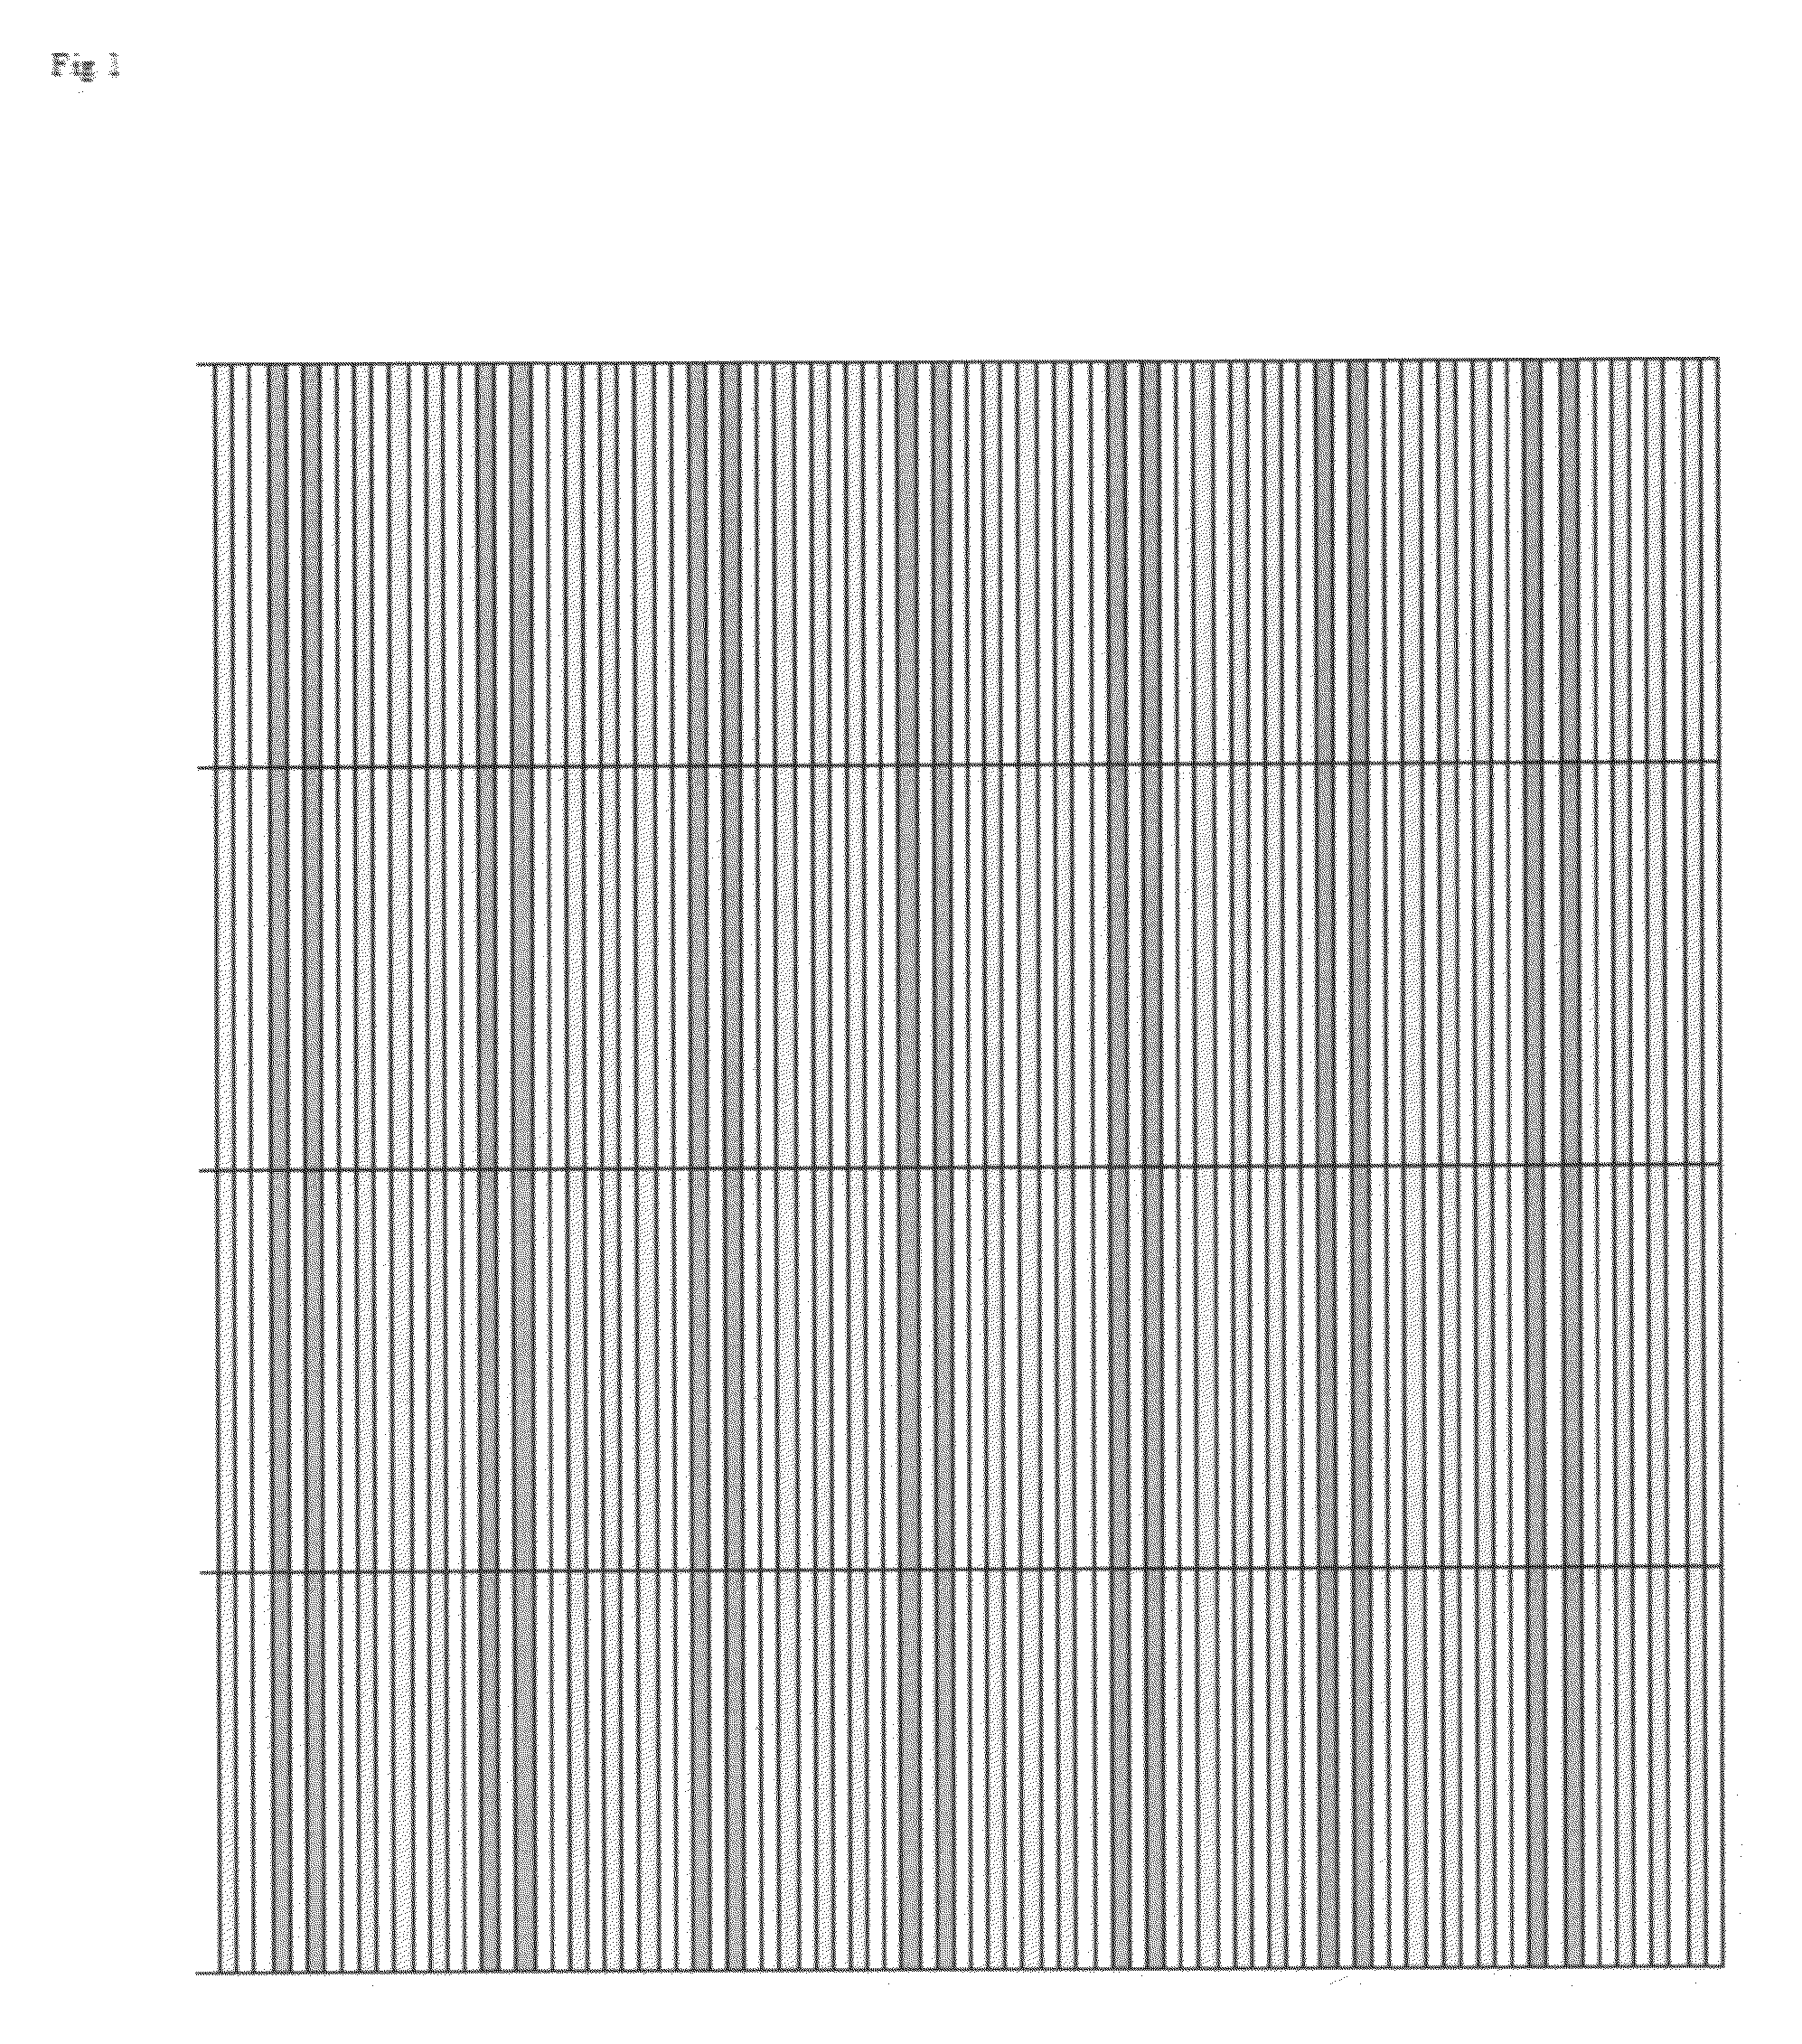 Notation system for music,displaying pitches in color on a keyboard chart and having rhythmic values indicated by the vertical length of said pitches